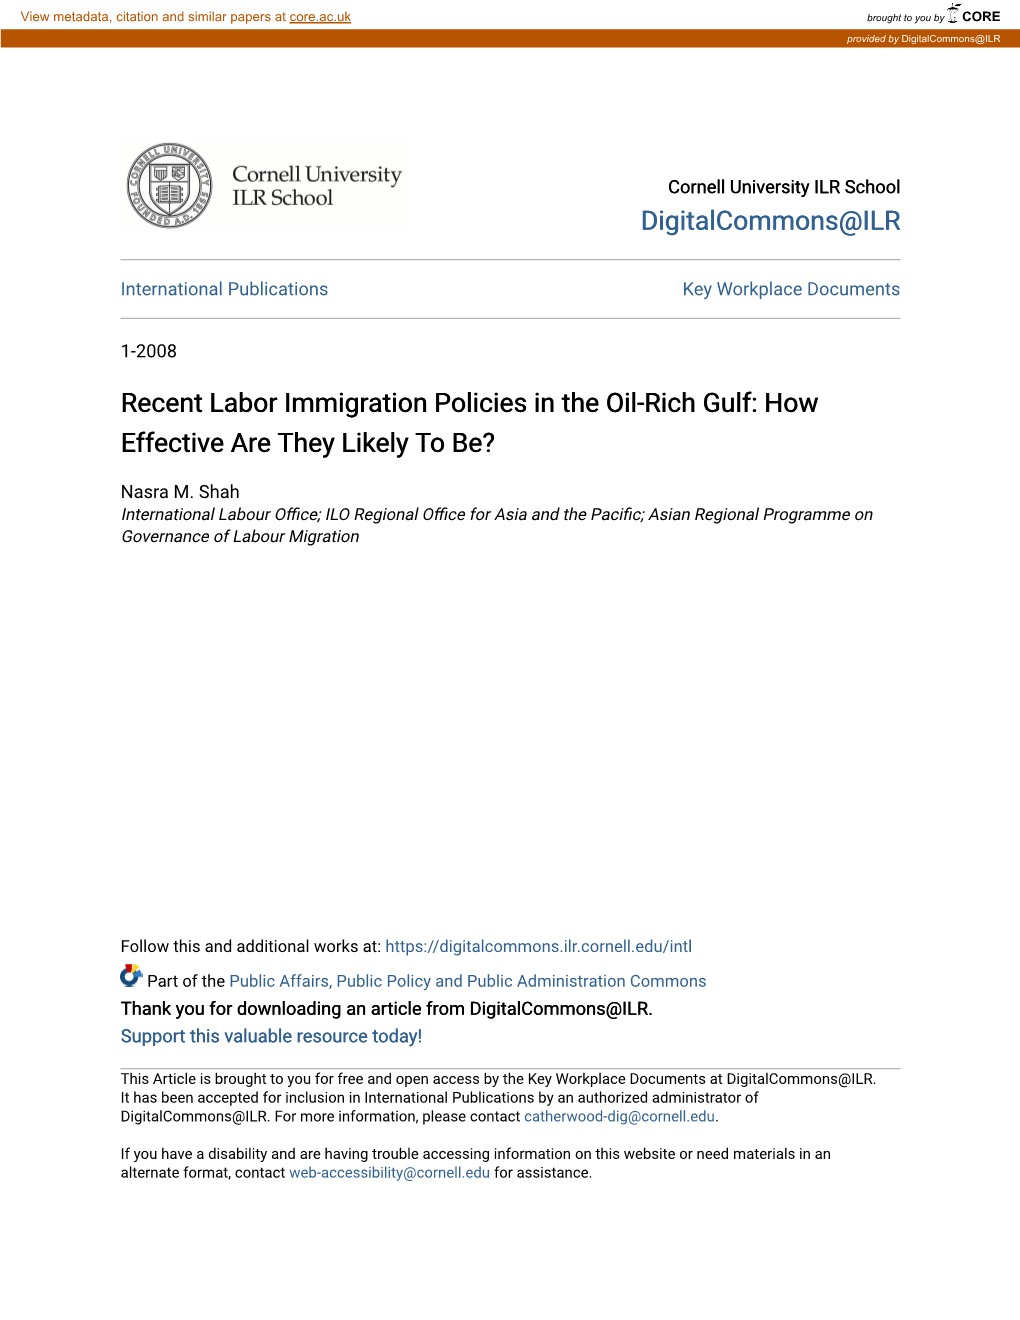 Recent Labor Immigration Policies in the Oil-Rich Gulf: How Effective Are They Likely to Be?